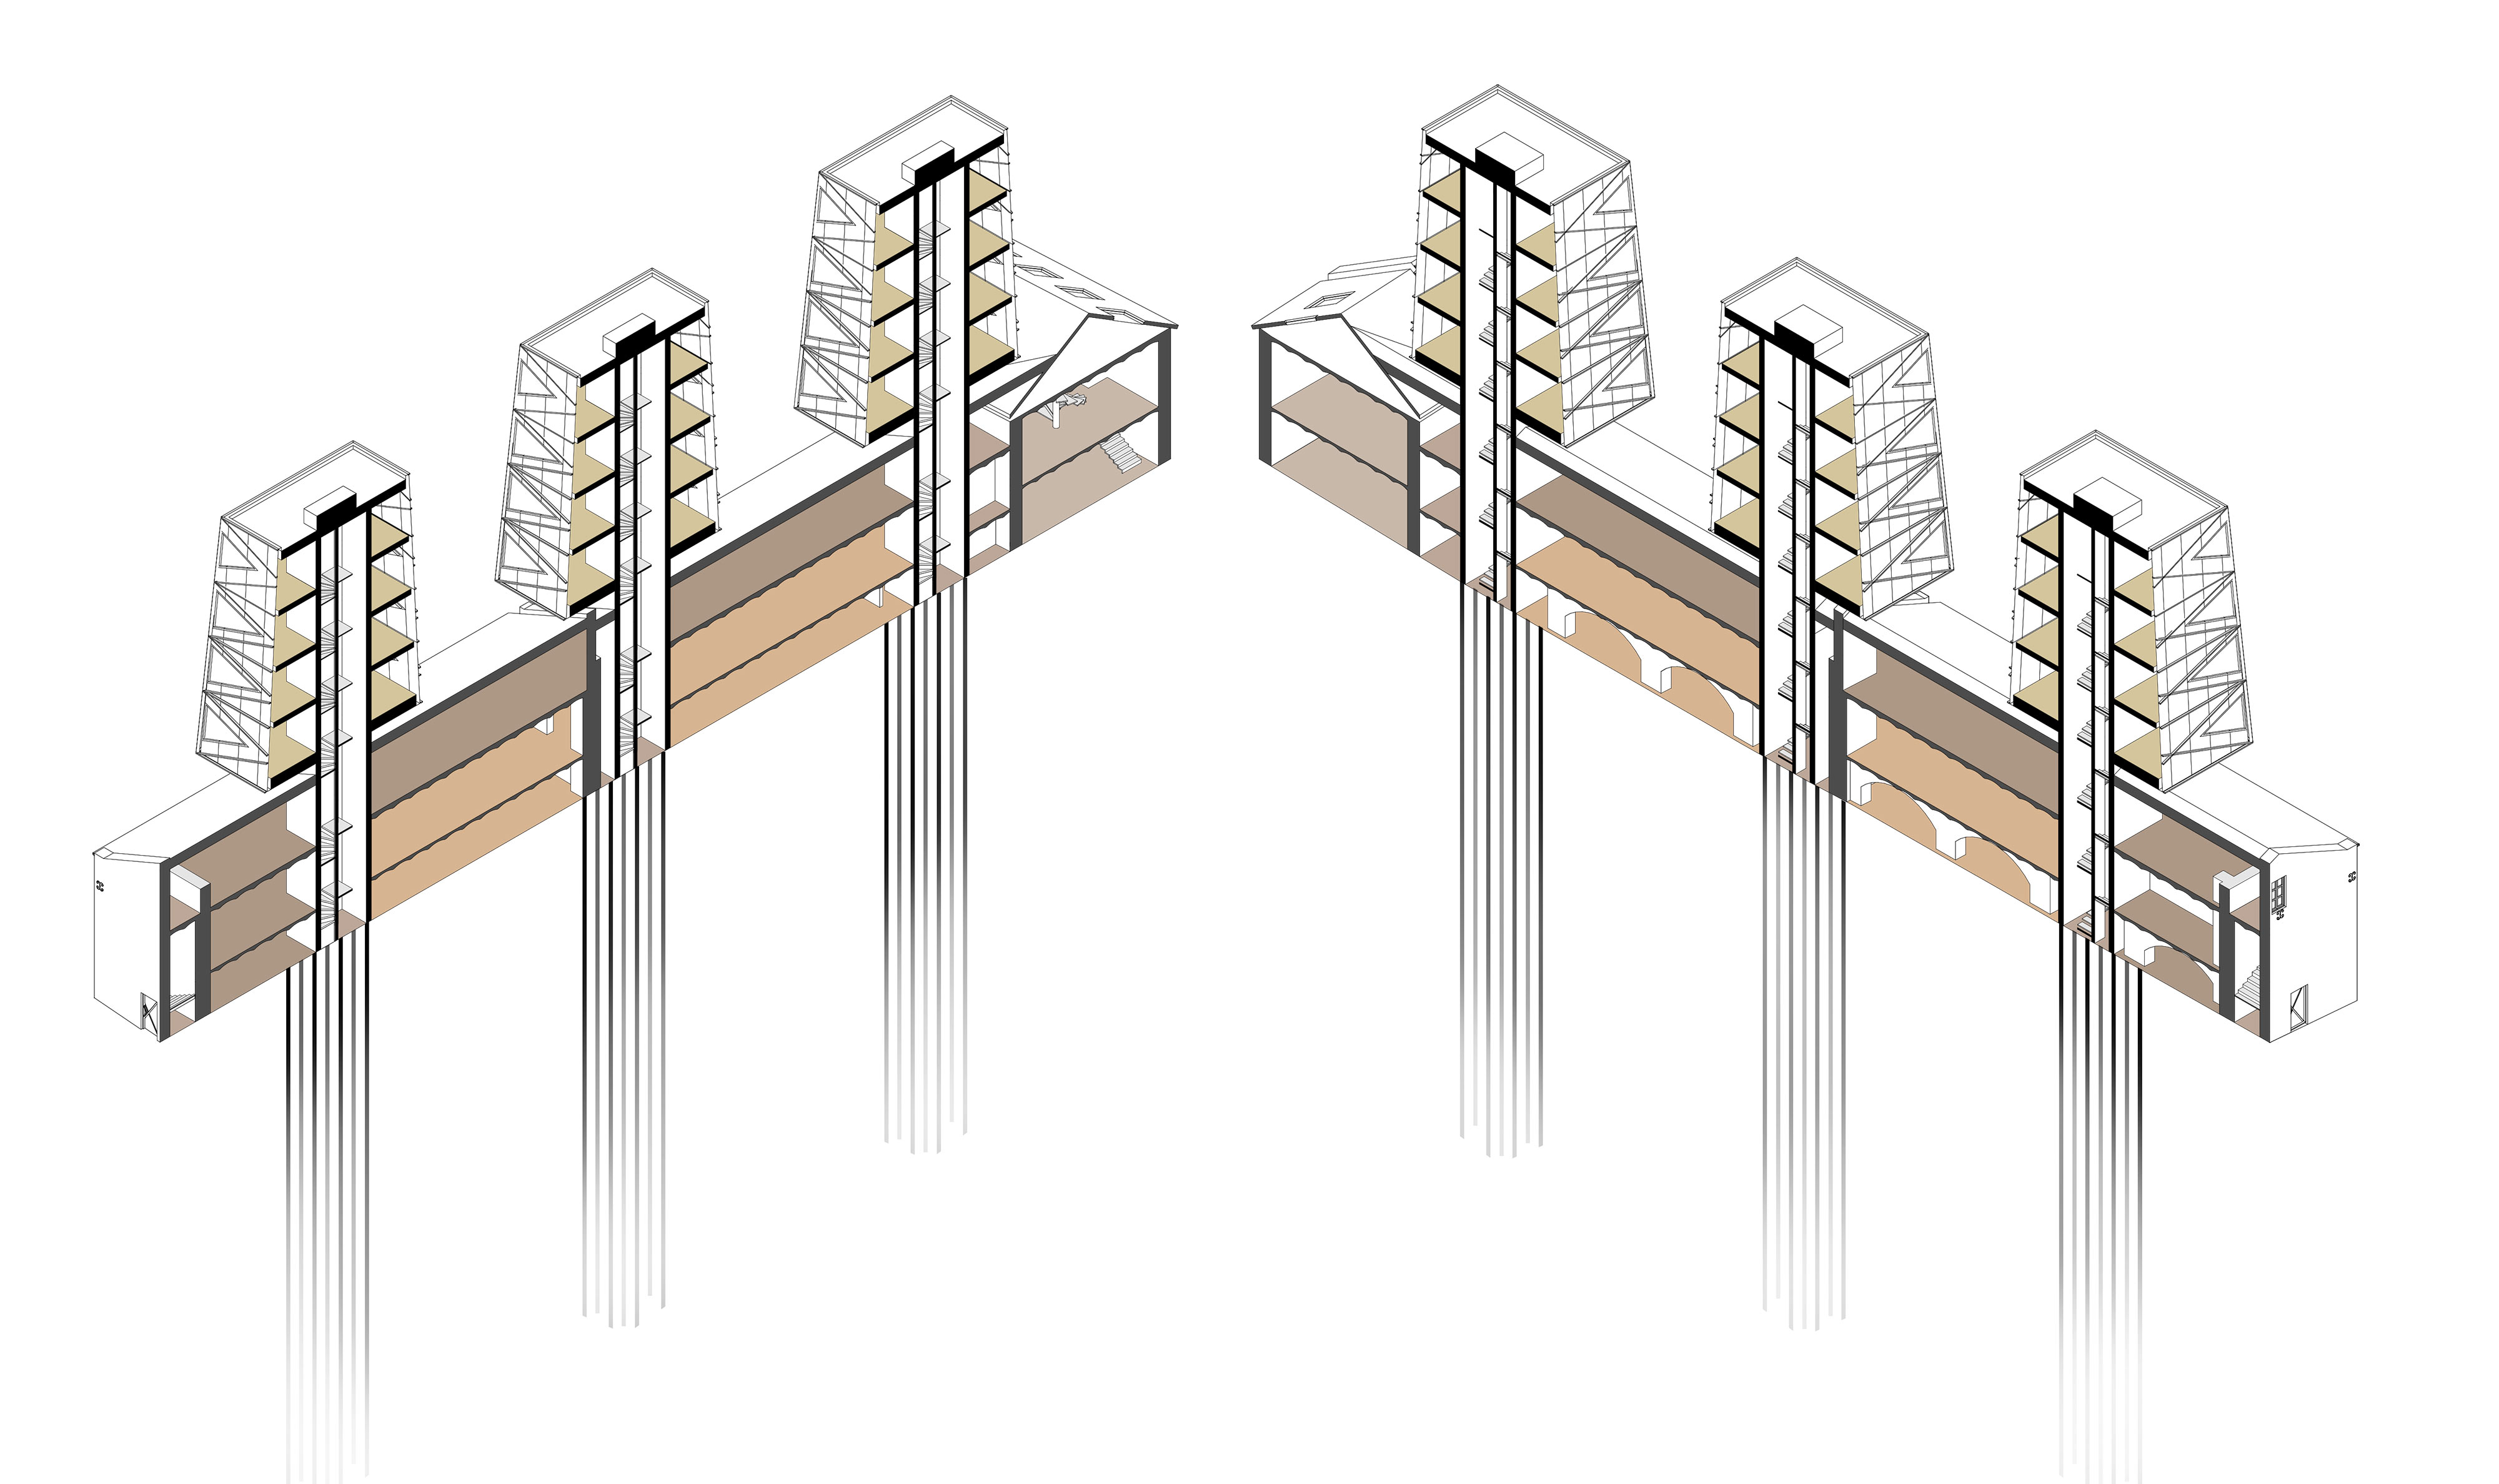 3D scheme of towers and piles